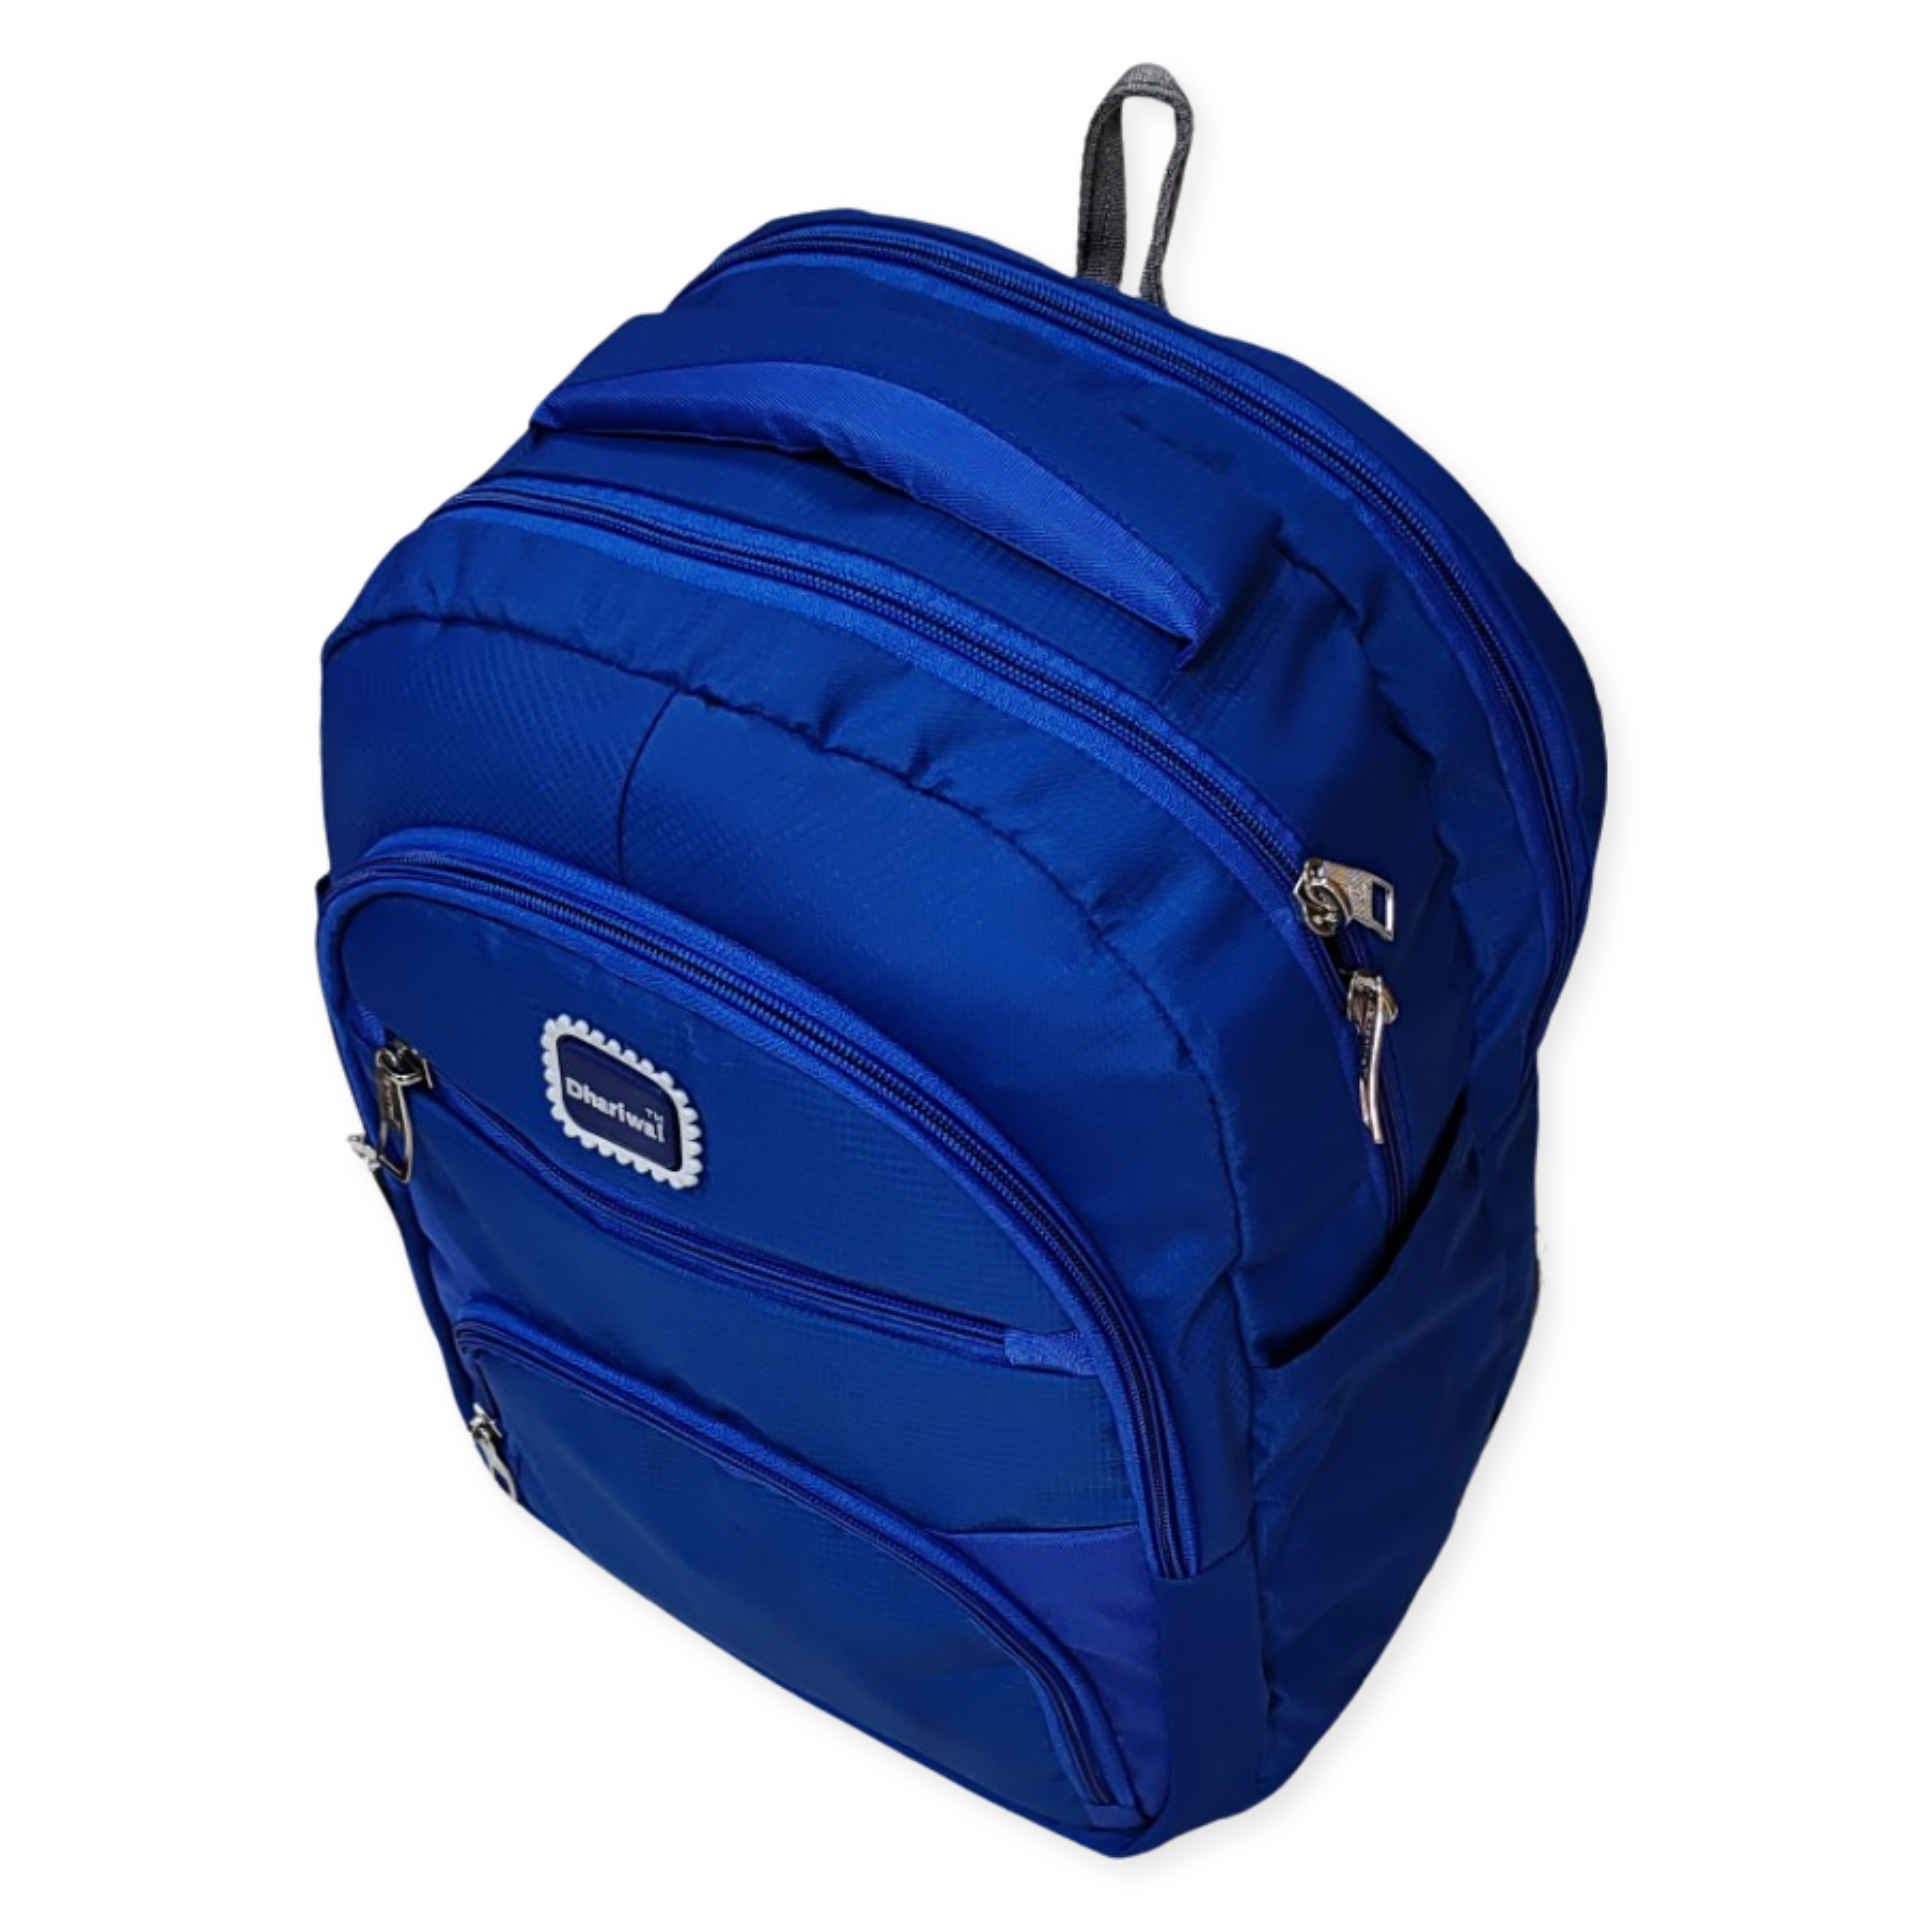 Dhariwal Unisex Dual Compartment Backpack 34l Bp-228 at Rs 1180.00 |  Computer Backpack, Corporate Backpack, लैपटॉप बैकपैक - Mohan Lal Jain,  Secunderabad | ID: 2851460313055